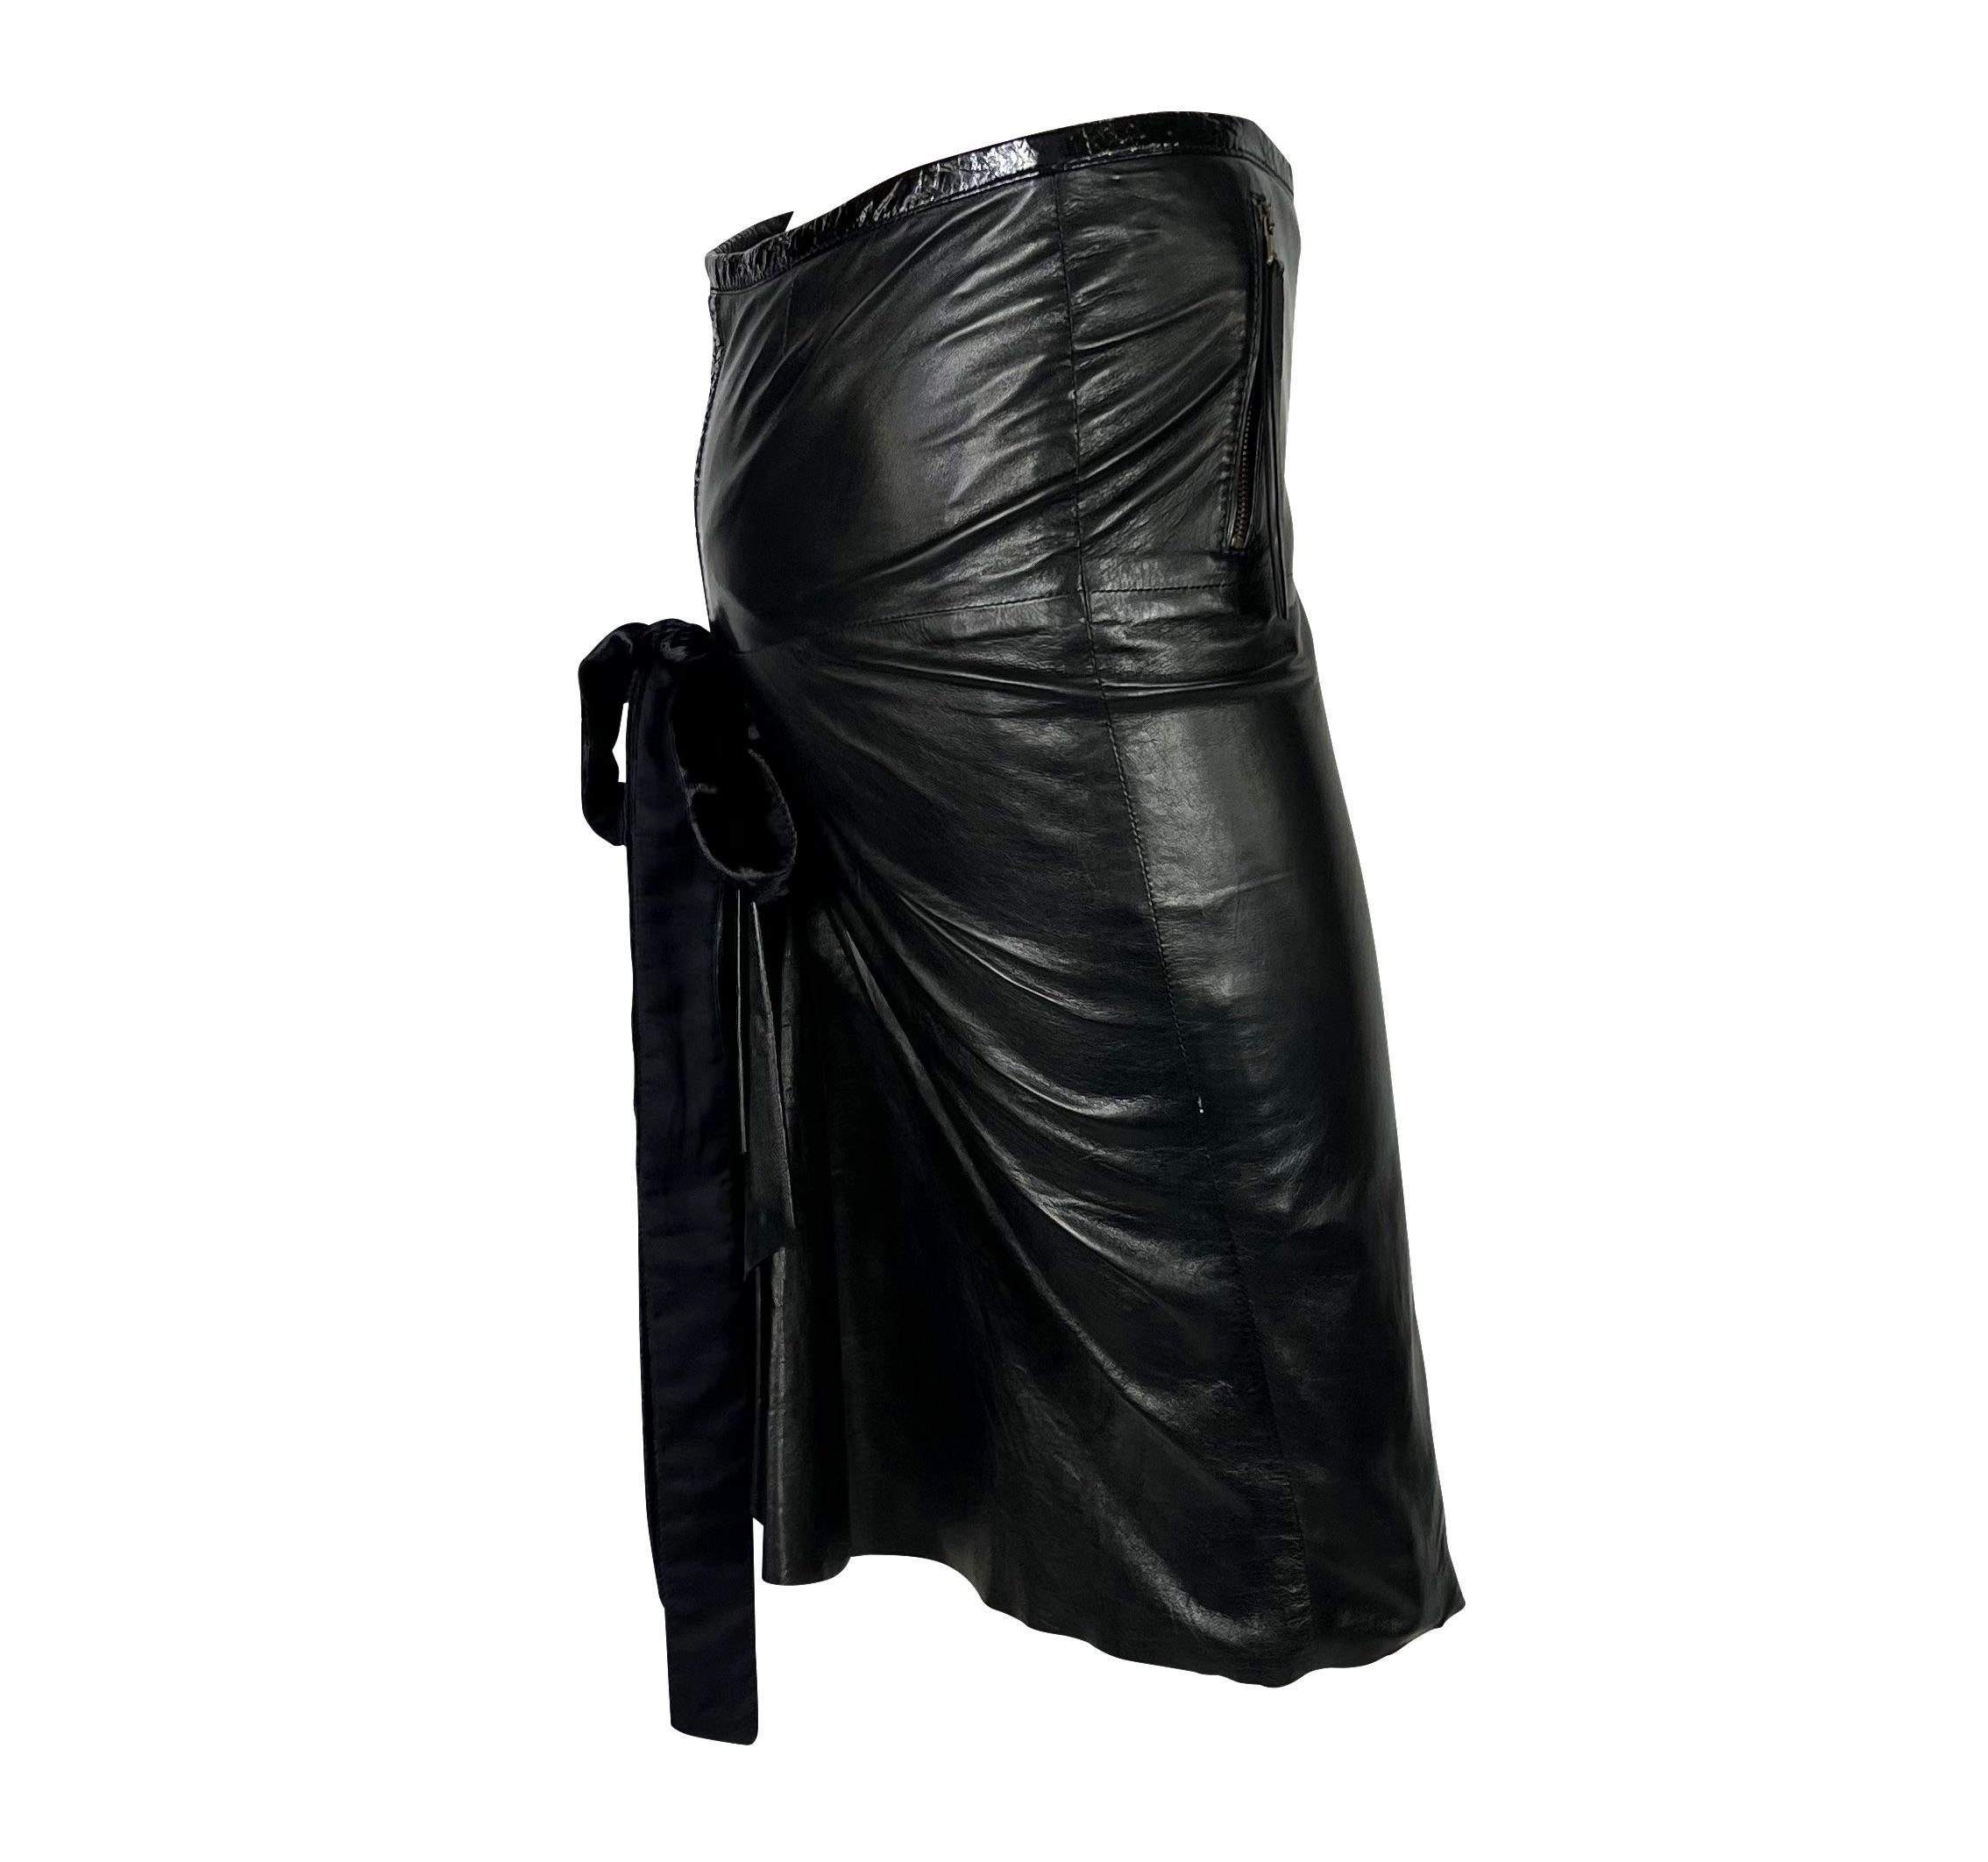 Presenting a black leather Roberto Cavalli pleated skirt. From the 2000s, this entirely leather skirt features a patent leather waistband, zipper pockets at the front, and ruching at the back. This skirt is complete with a velvet bow cascading down